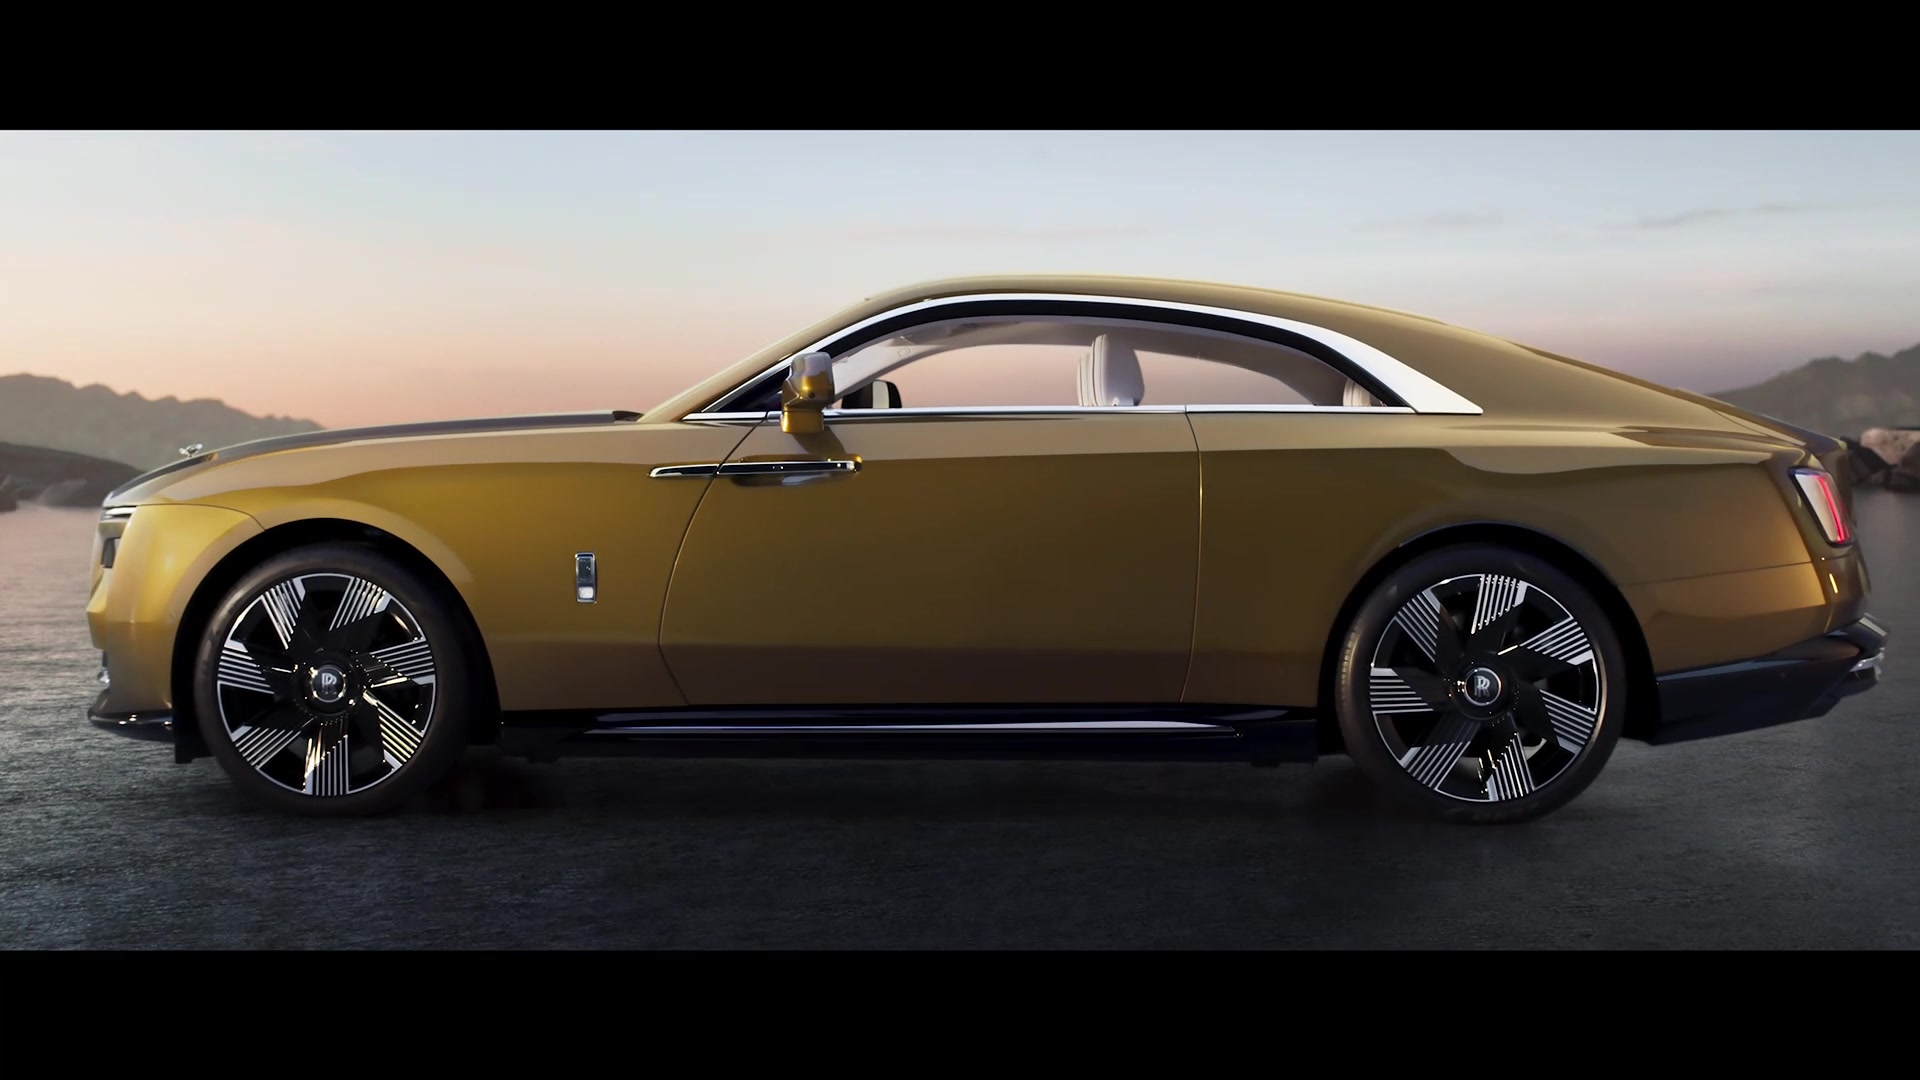 Rolls-Royce Spectre Unveiled - The first fully-electric Rolls-Royce - Brand film